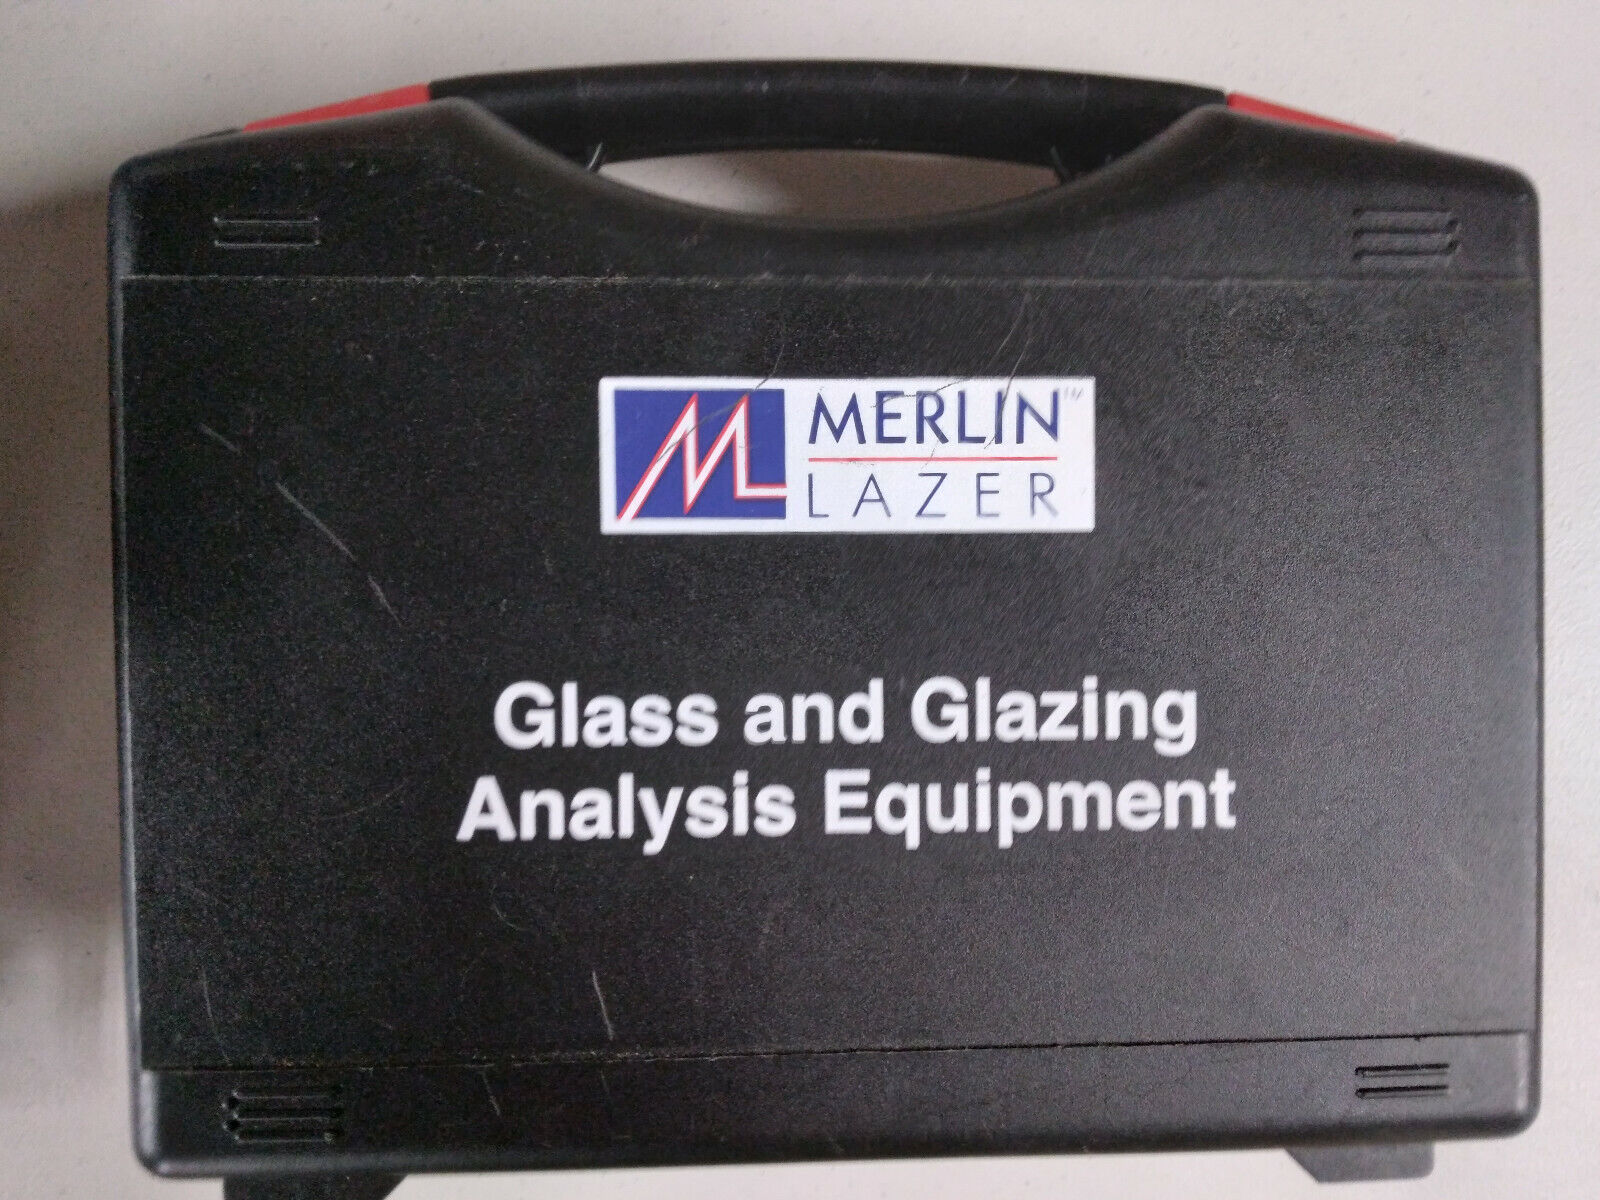 Glass & Glazing Analysis Set - Detects If Tempered, Measure Air Gap, Lowe Window